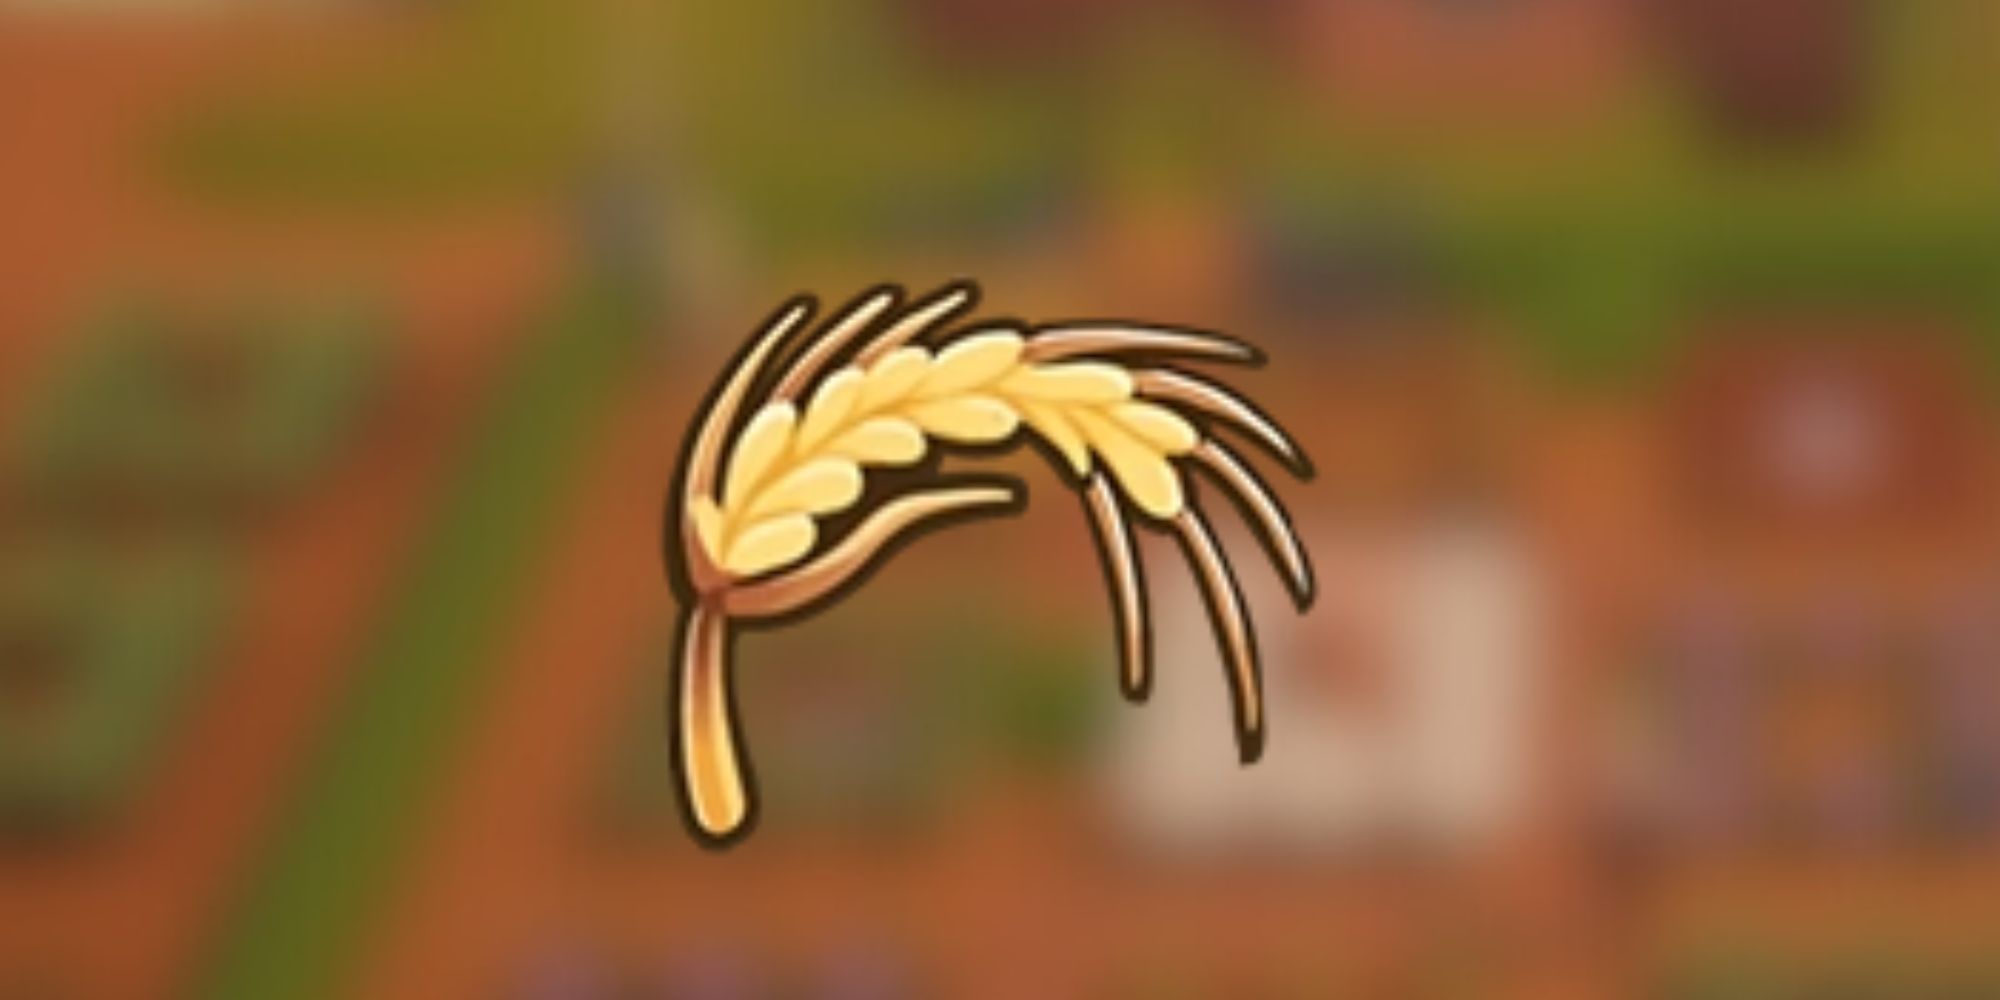 Wheat icon on a blurred background in Coral Island